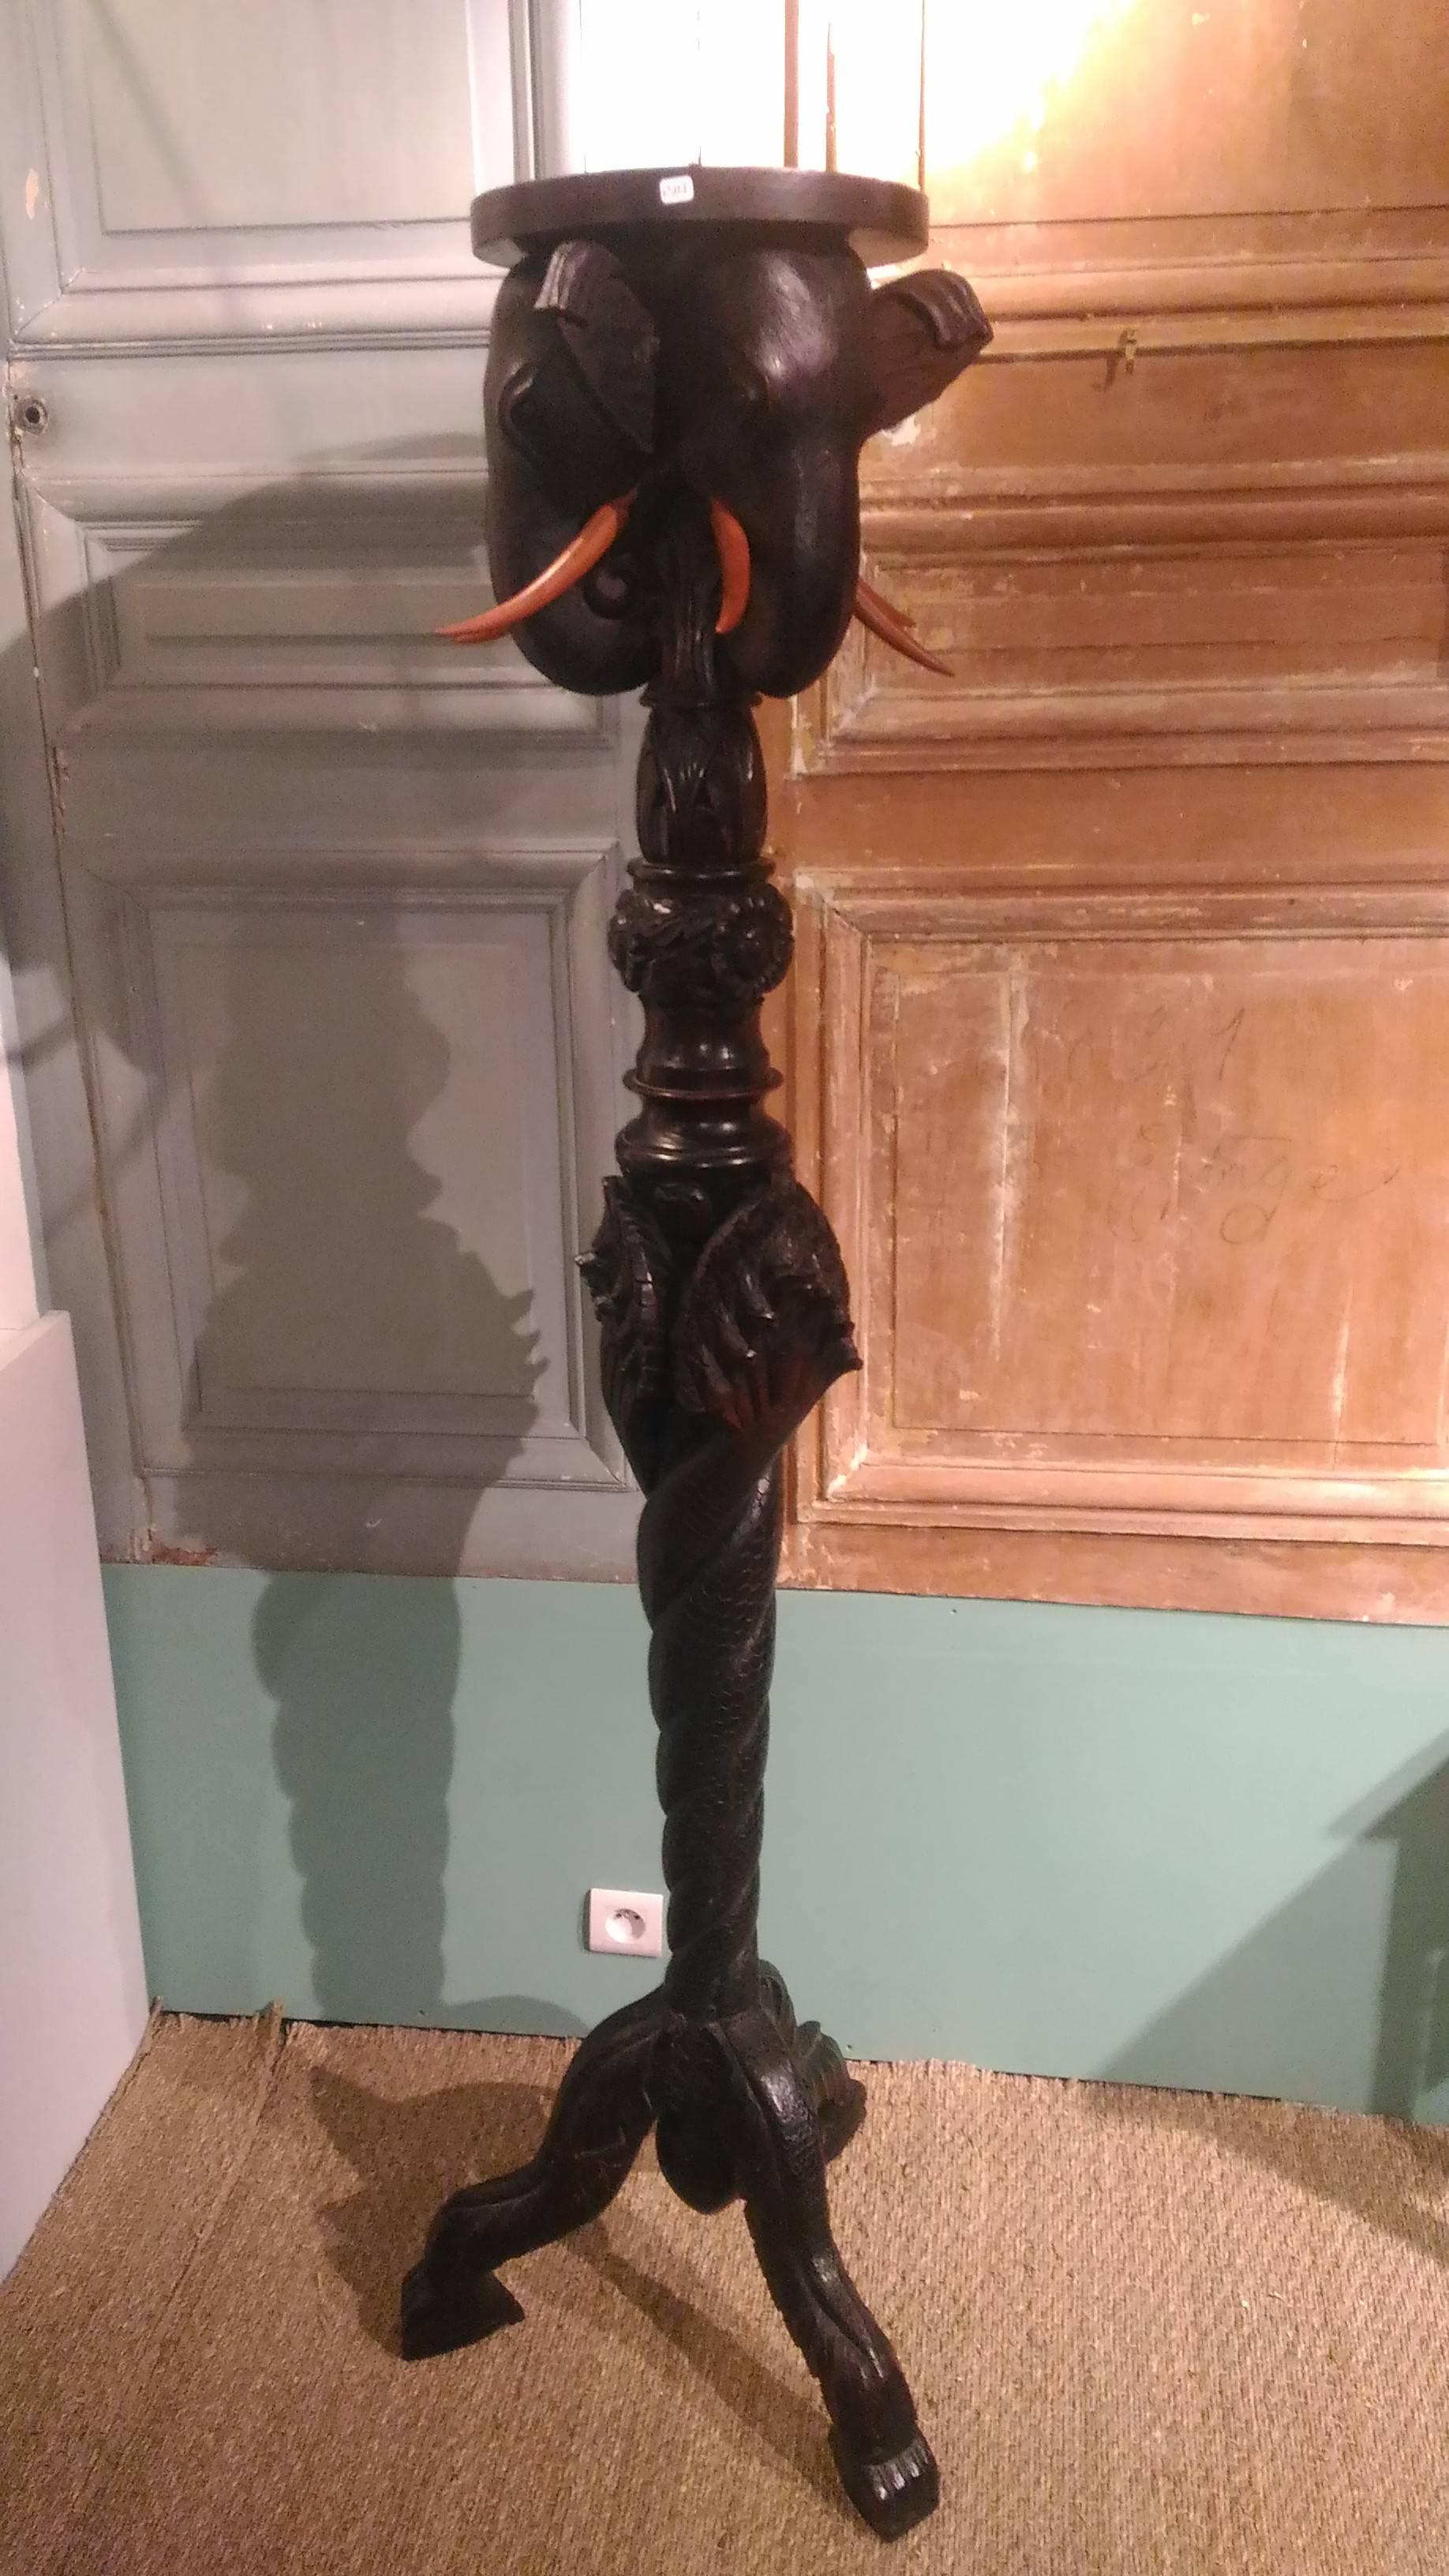 This pedestal dates from the late 19th century. It consists of a long barrel ending in 3 feet of animals reminiscent of a griffin. The column, stylized, is formed by reptile tails joining at the first level of the pedestal. The underside of the